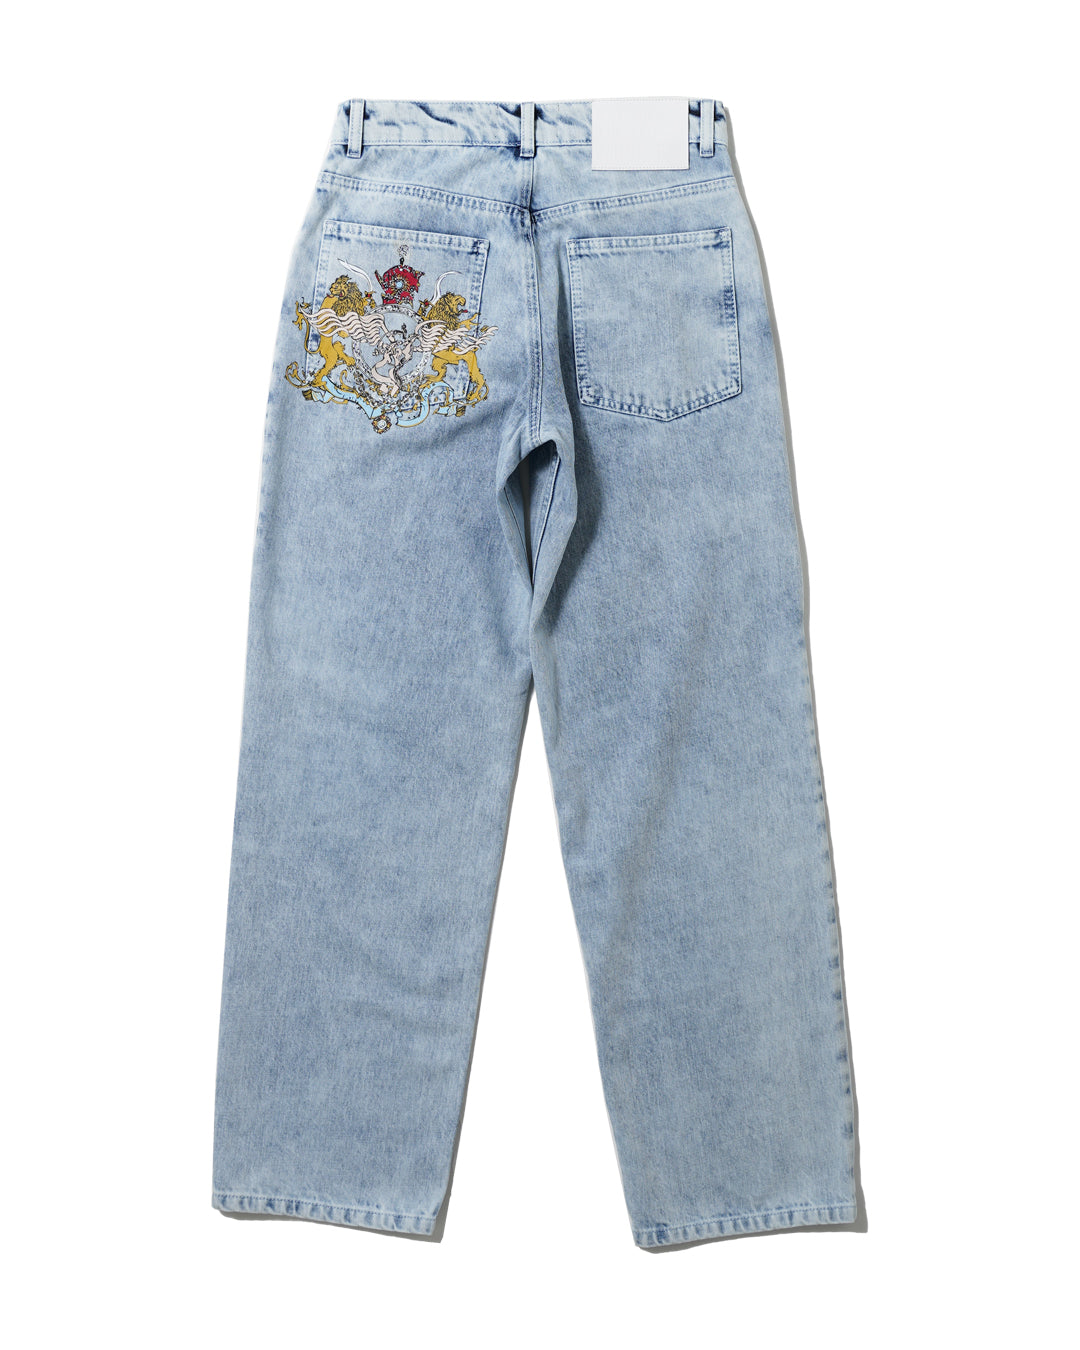 ESCUDO' PRINT BLUE DENIM PANTS - Baby's all right